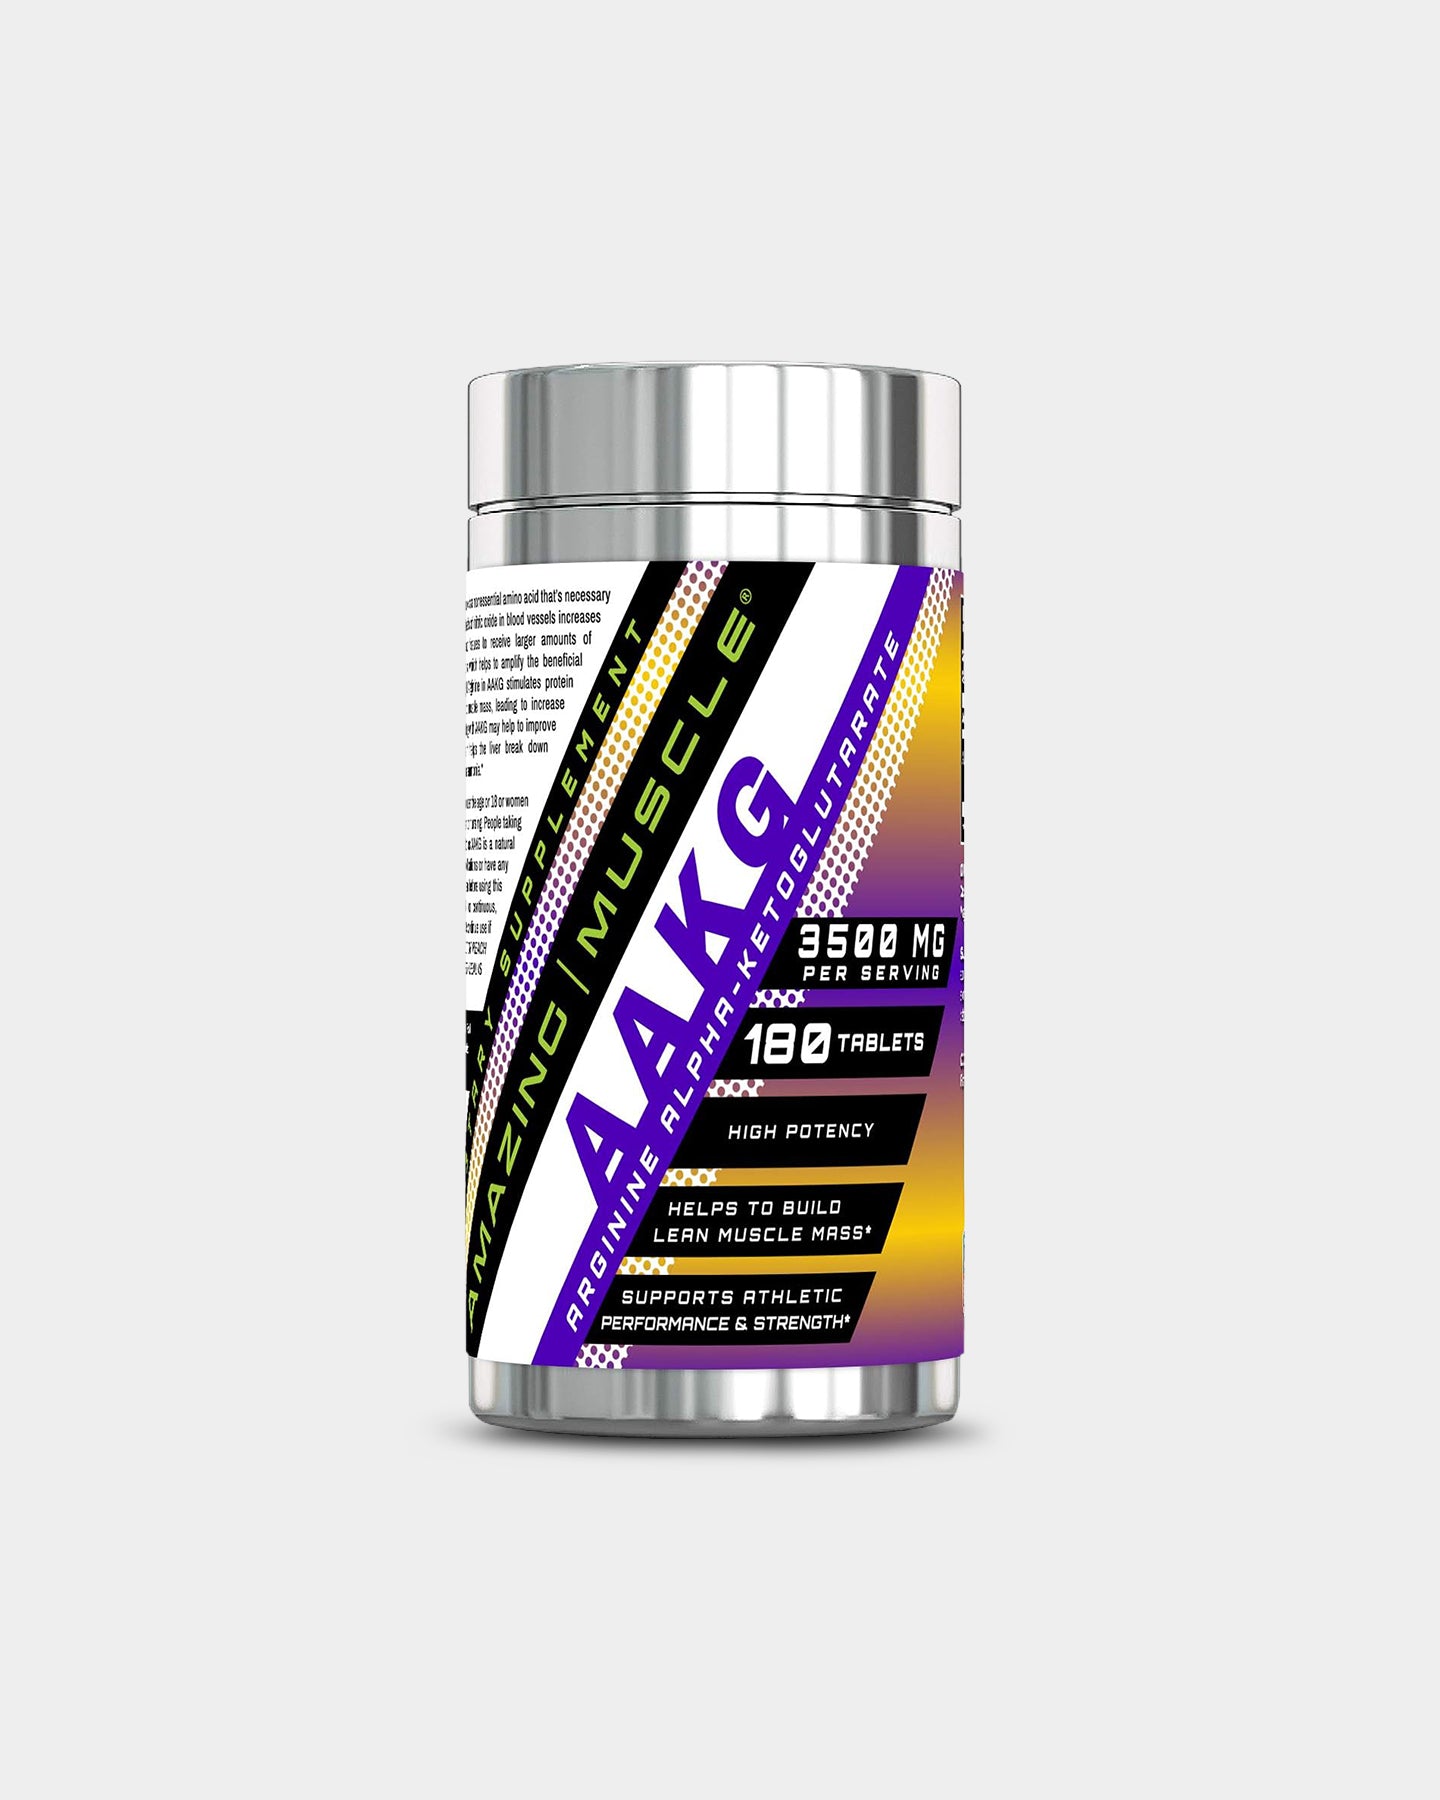 Amazing Muscle AAKG 3500mg A1